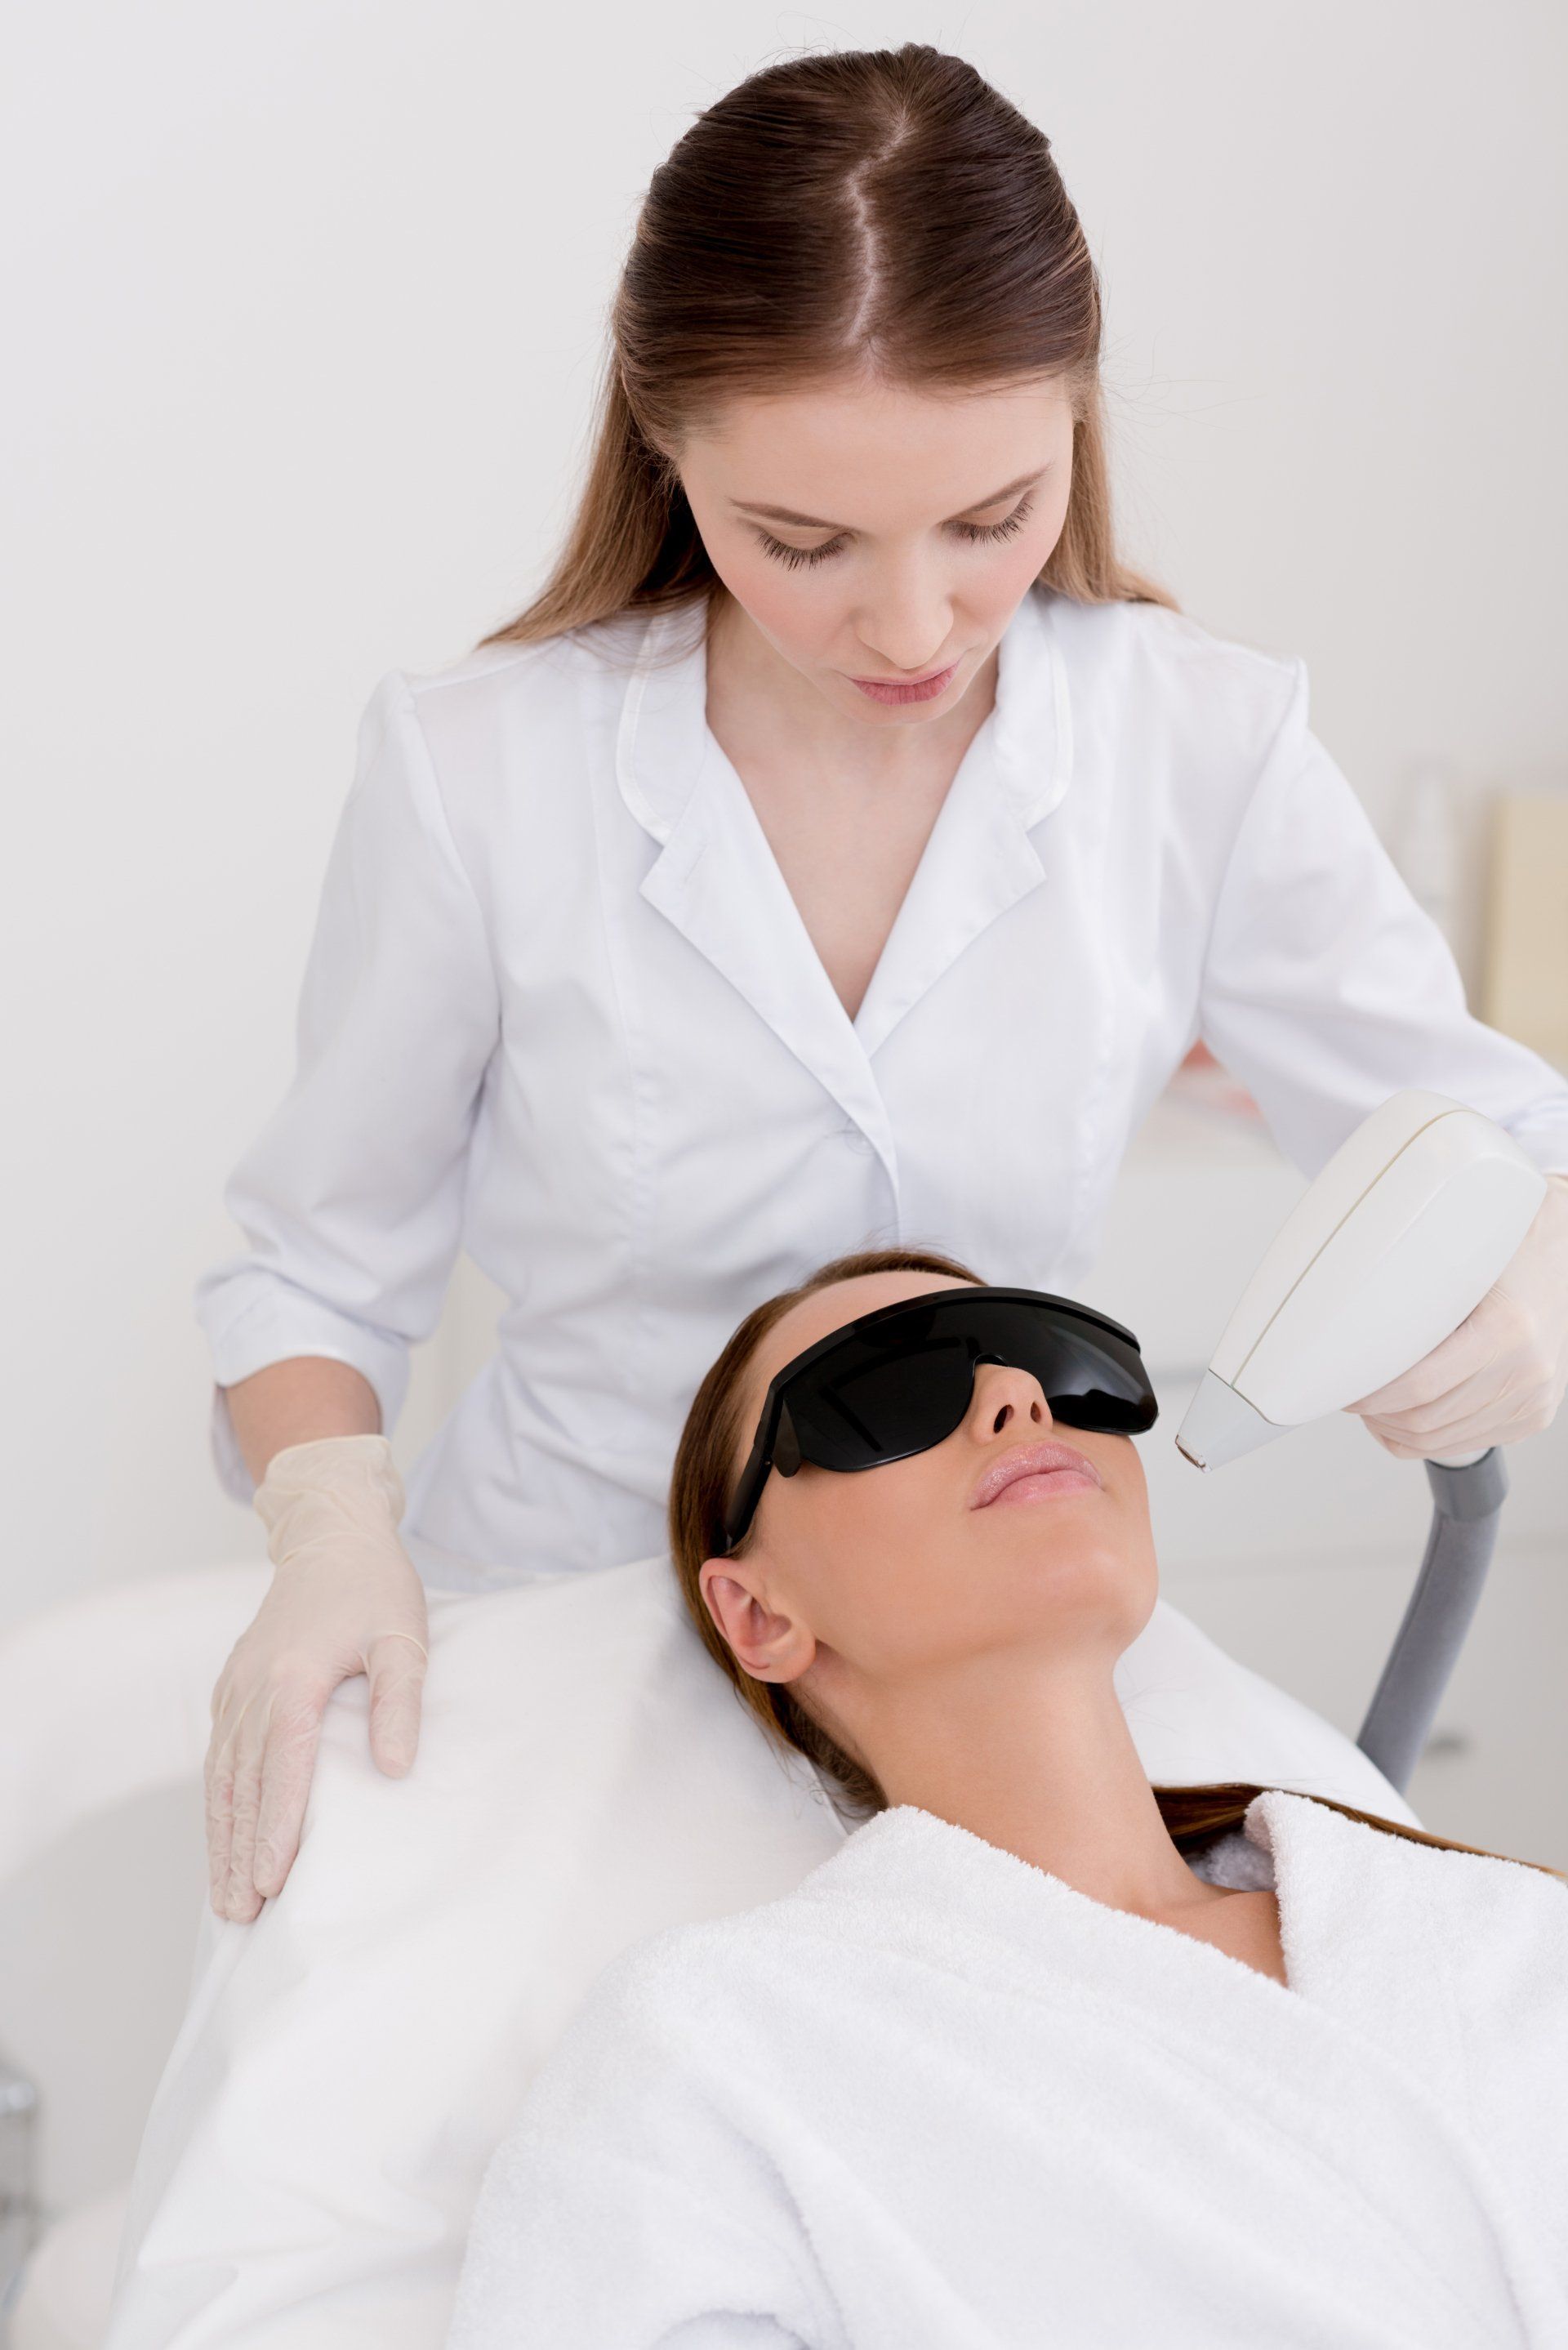 Woman getting laser hair removal treatment on face